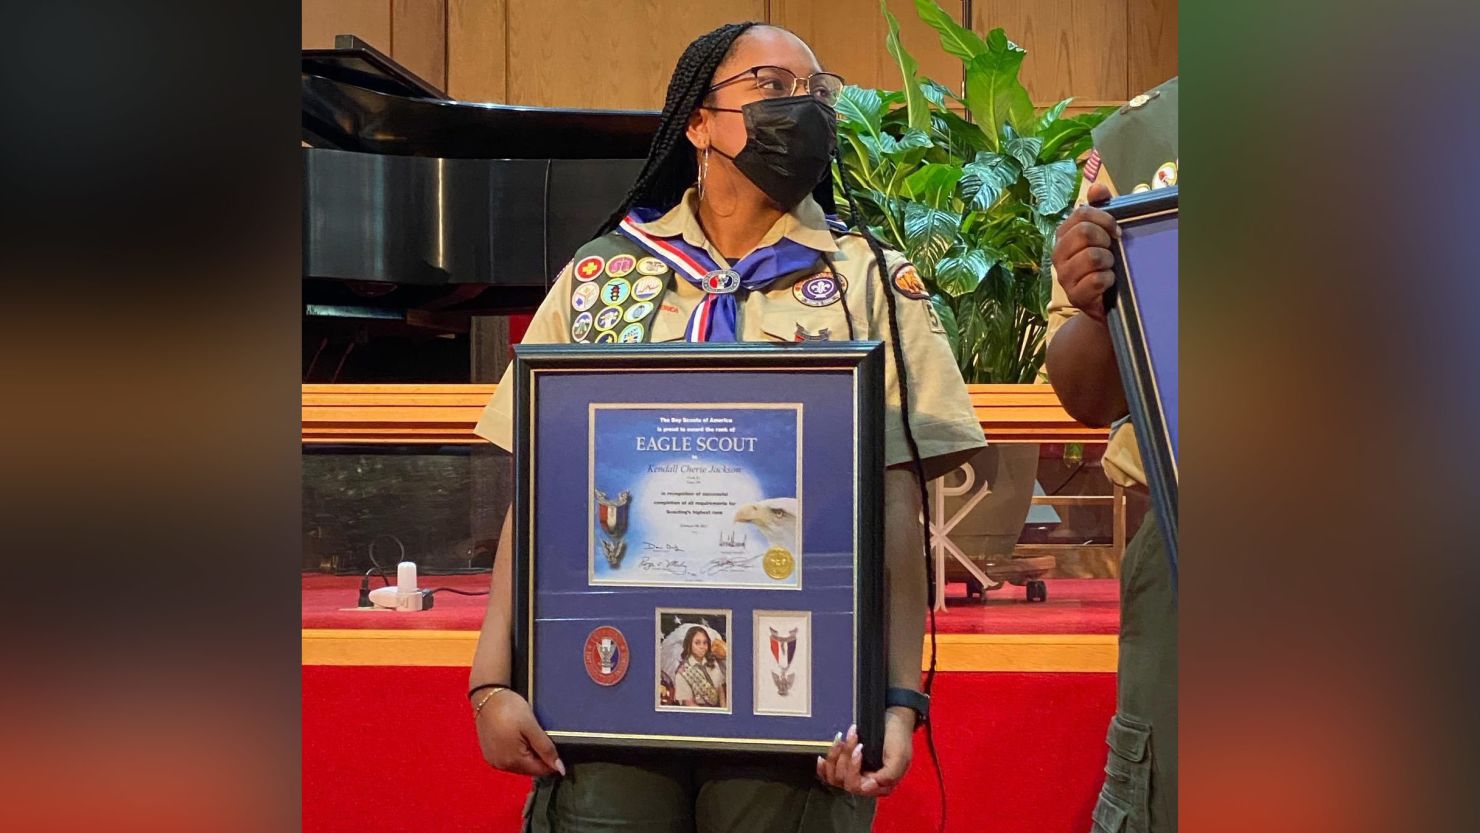 Kendall Jackson was awarded her Eagle Scout medal on Sunday.